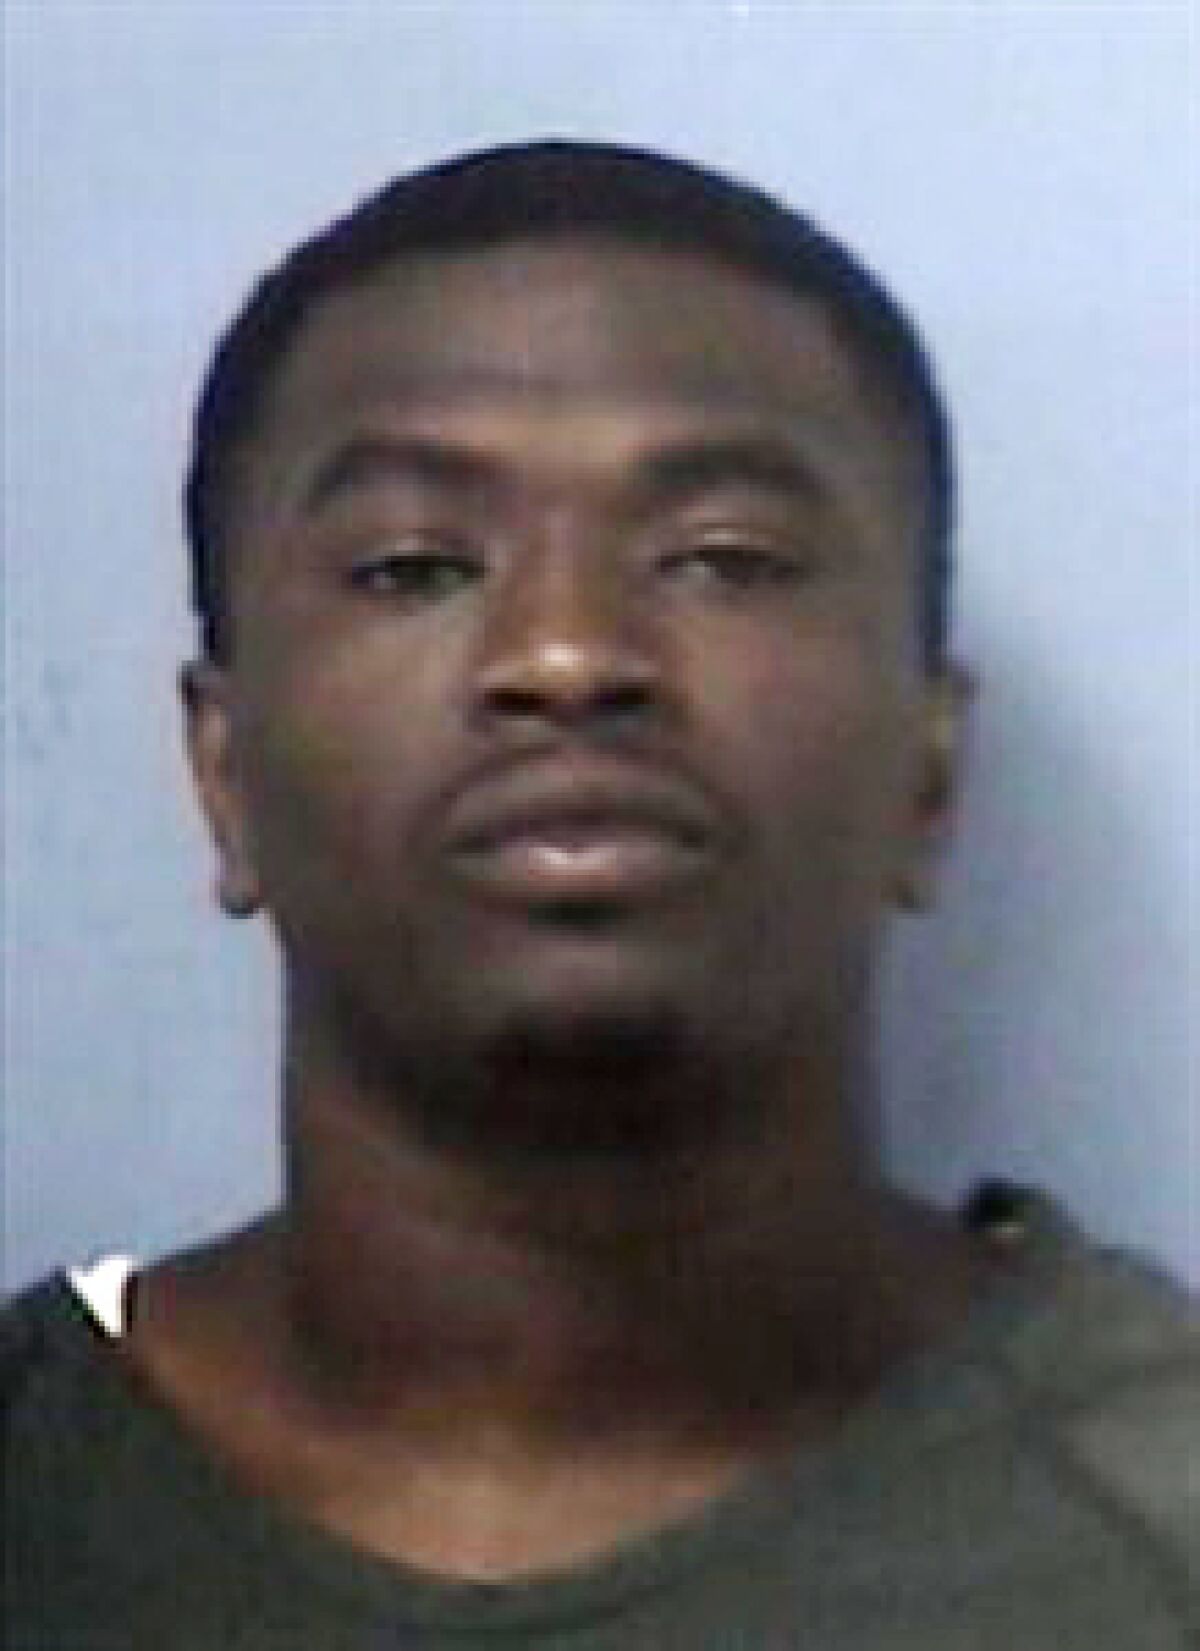 This image provided by the Crittenden County Detention Center Freddie Gladney. Rapper Bankroll Freddie was in an Arkansas jail Friday, April 15, 2022 after being arrested on federal drug and weapons charges, officials said. The 27-year-old performer, known off stage as Freddie Demarus Gladney of Conway, Arkansas, was arrested about 6:30 p.m. Thursday during a traffic stop for speeding on Interstate 55 in Marion, Arkansas, almost 20 miles from Memphis, Tennessee, according to the Arkansas State Police. (Crittenden County Detention Center via AP)